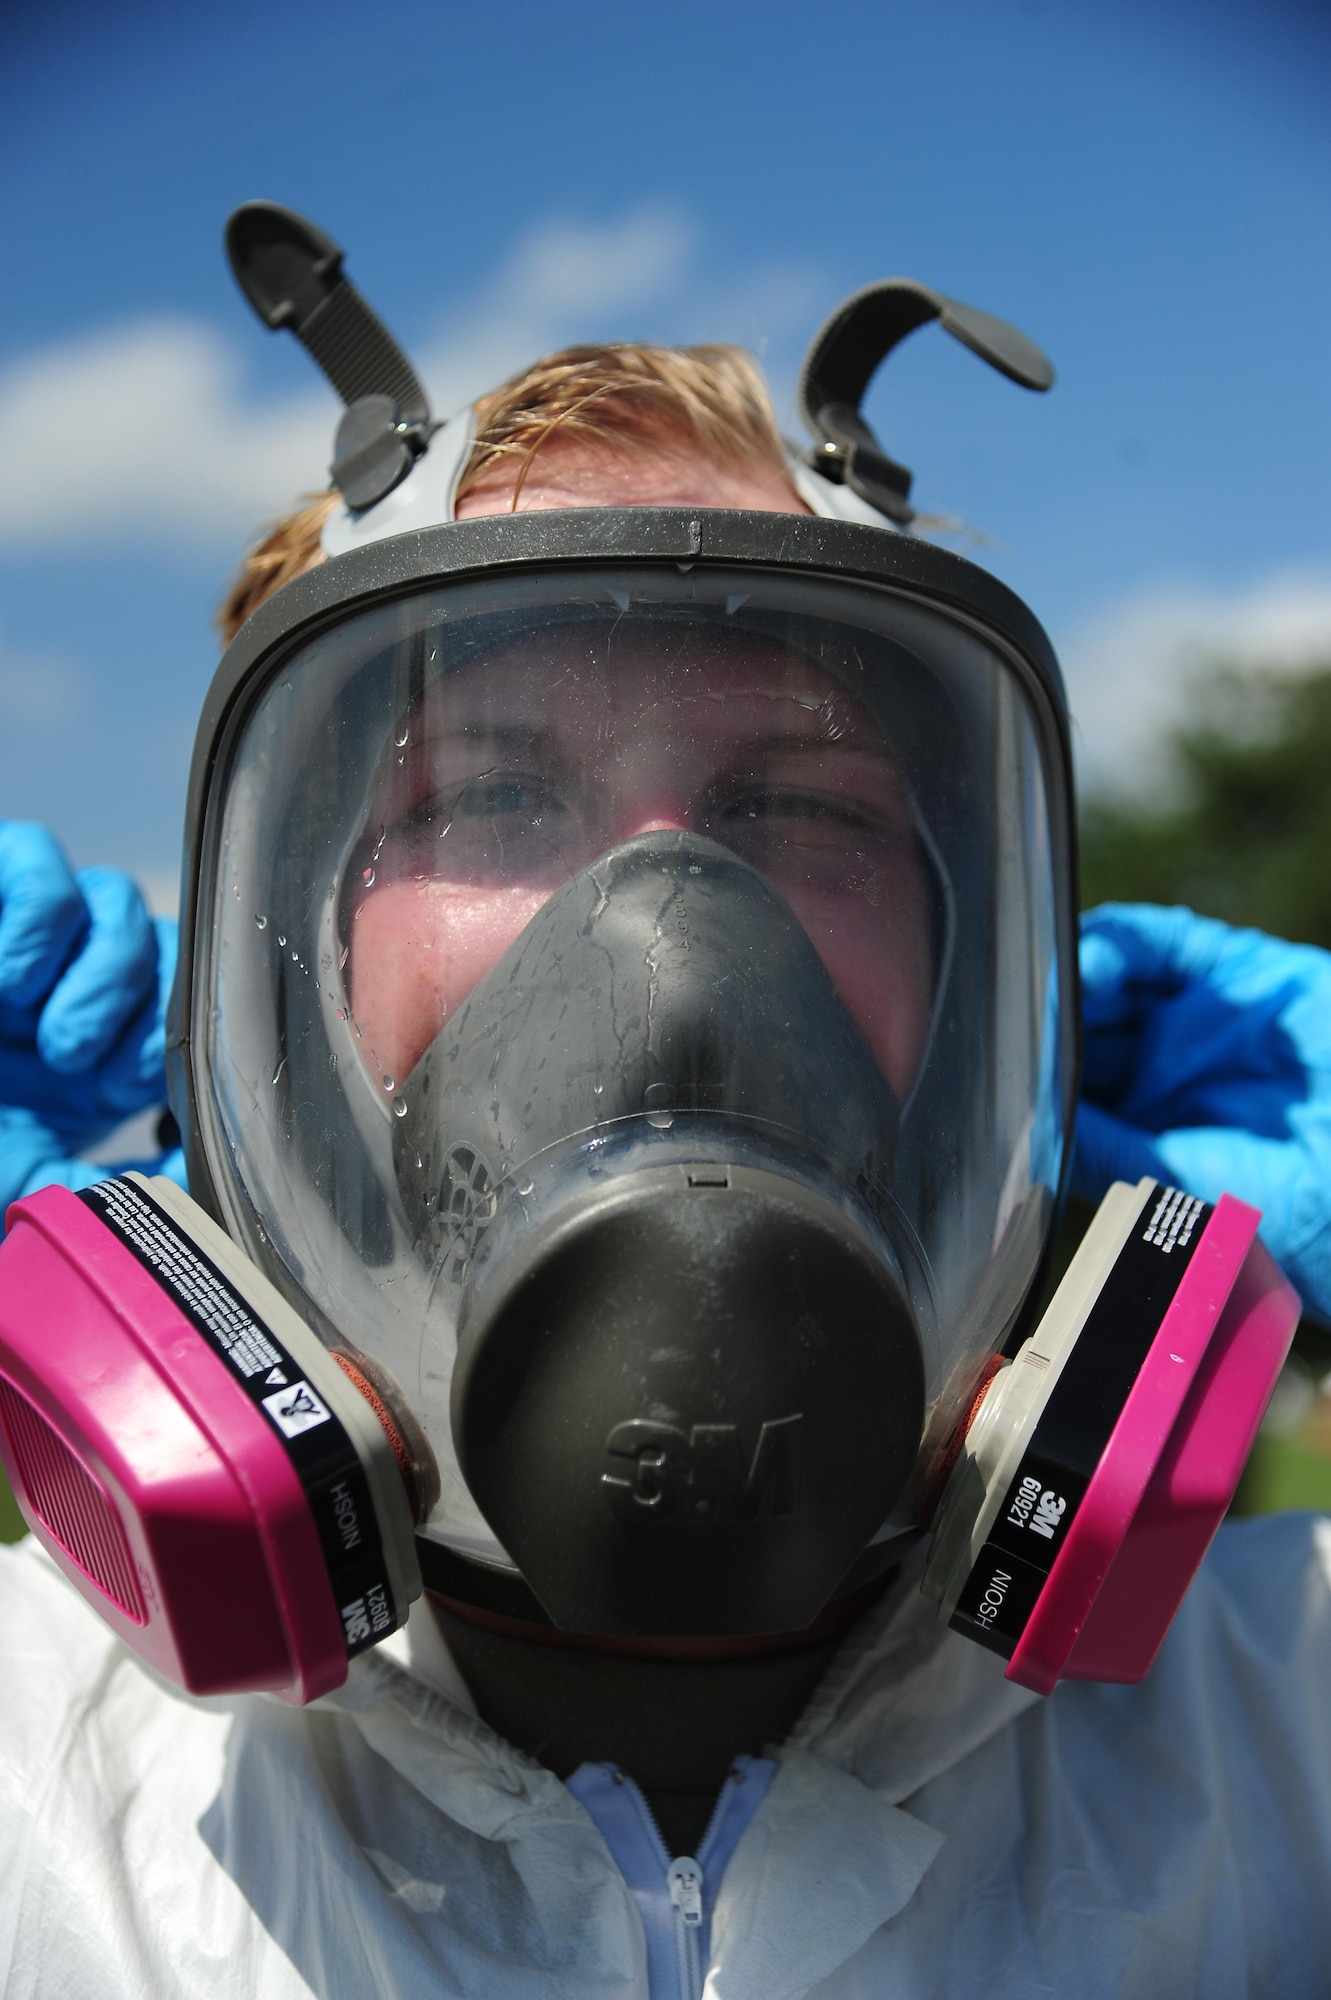 A low observable technician from the 509th Maintenance Squadron tightens the straps on his respirator mask prior to painting an FB-111A General Dynamics Aardvark static display at Whiteman Air Force Base, Mo., Sept. 13, 2016. In addition to aircraft painting and other normal duties, low observable technicians perform cosmetic maintenance on static displays at Whiteman. (U.S. Air Force photo by Senior Airman Joel Pfiester)